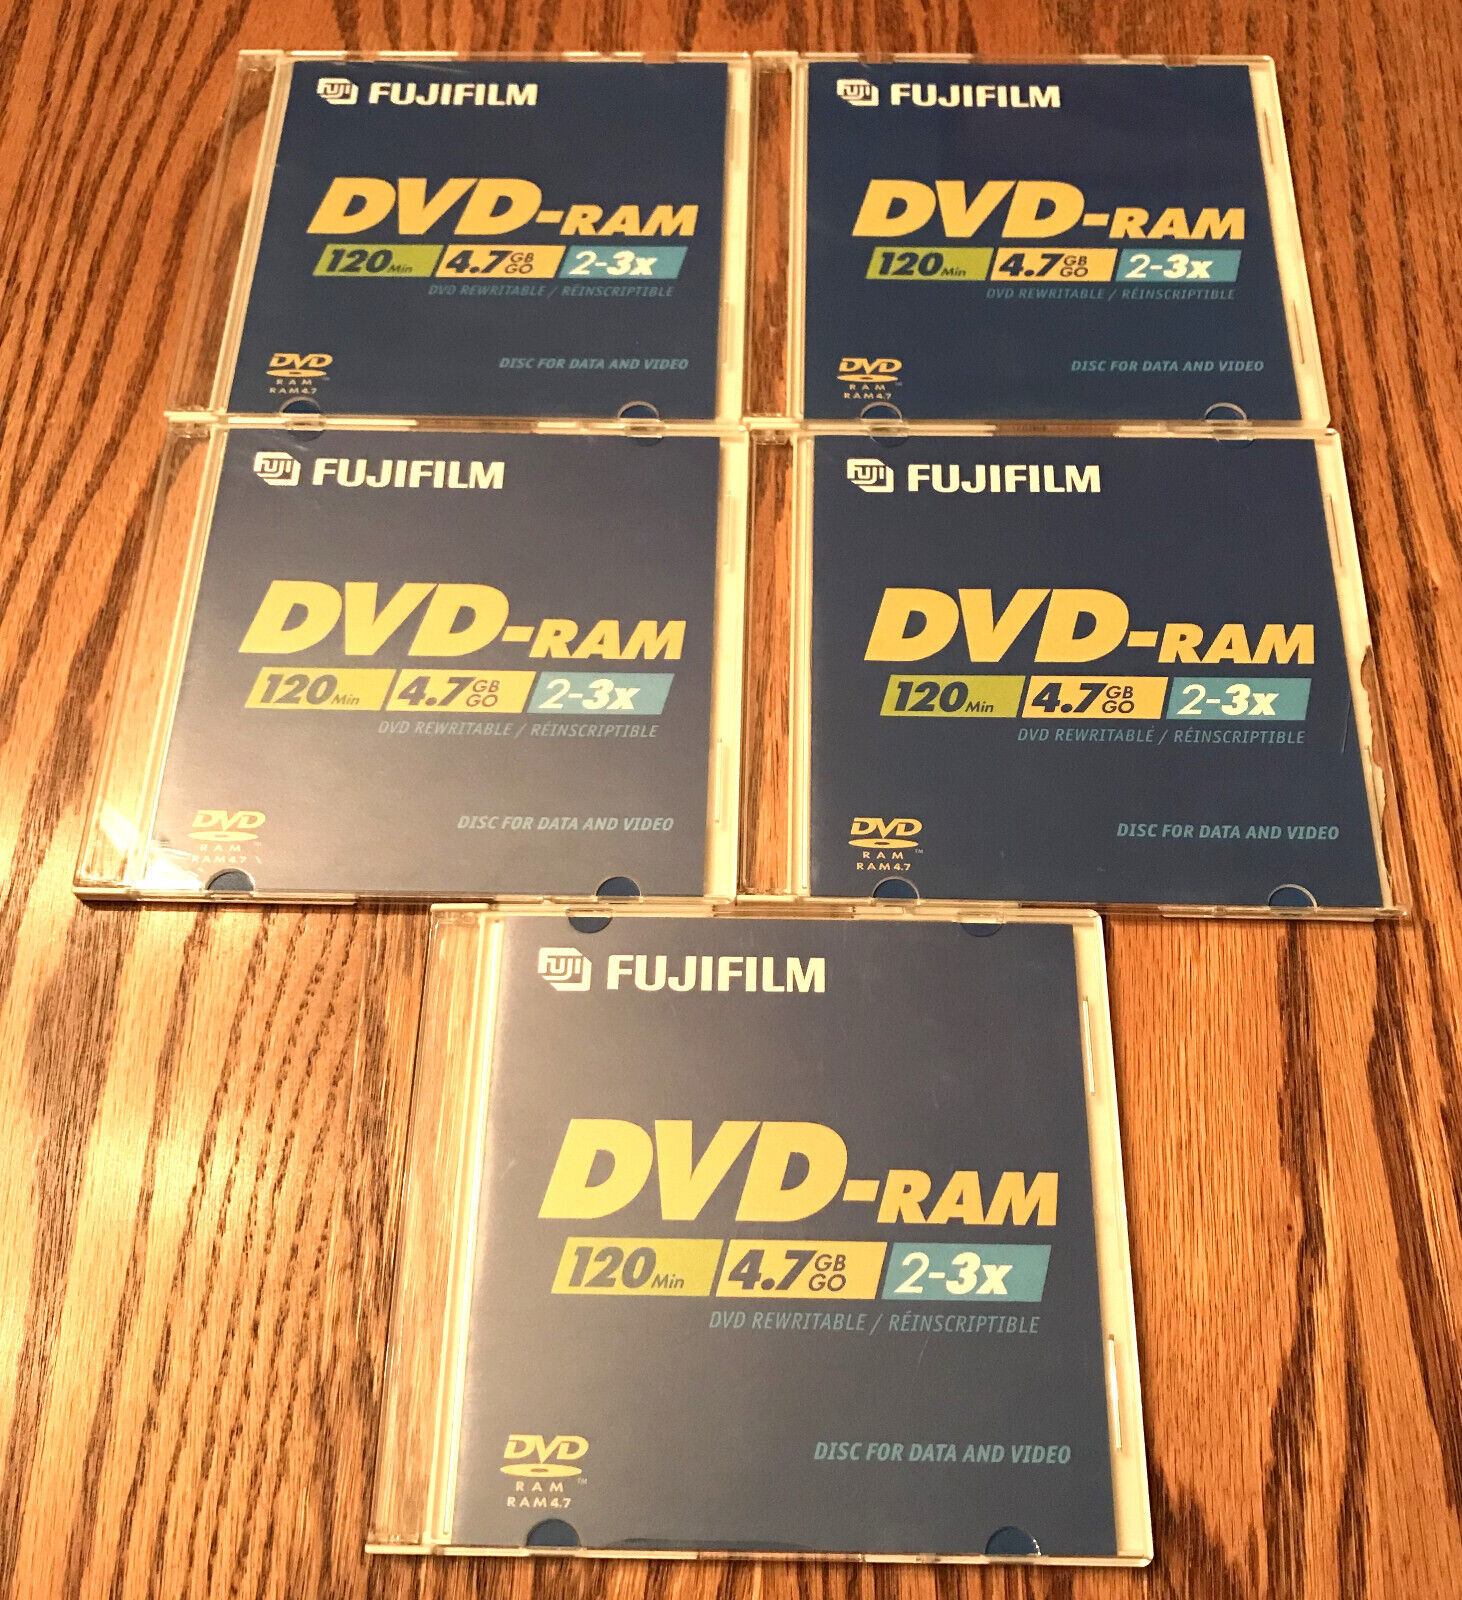 Lot of 5 Fujifilm DVD-RAM 120 Min 4.7 GB Rewriteable Discs for Data and Video